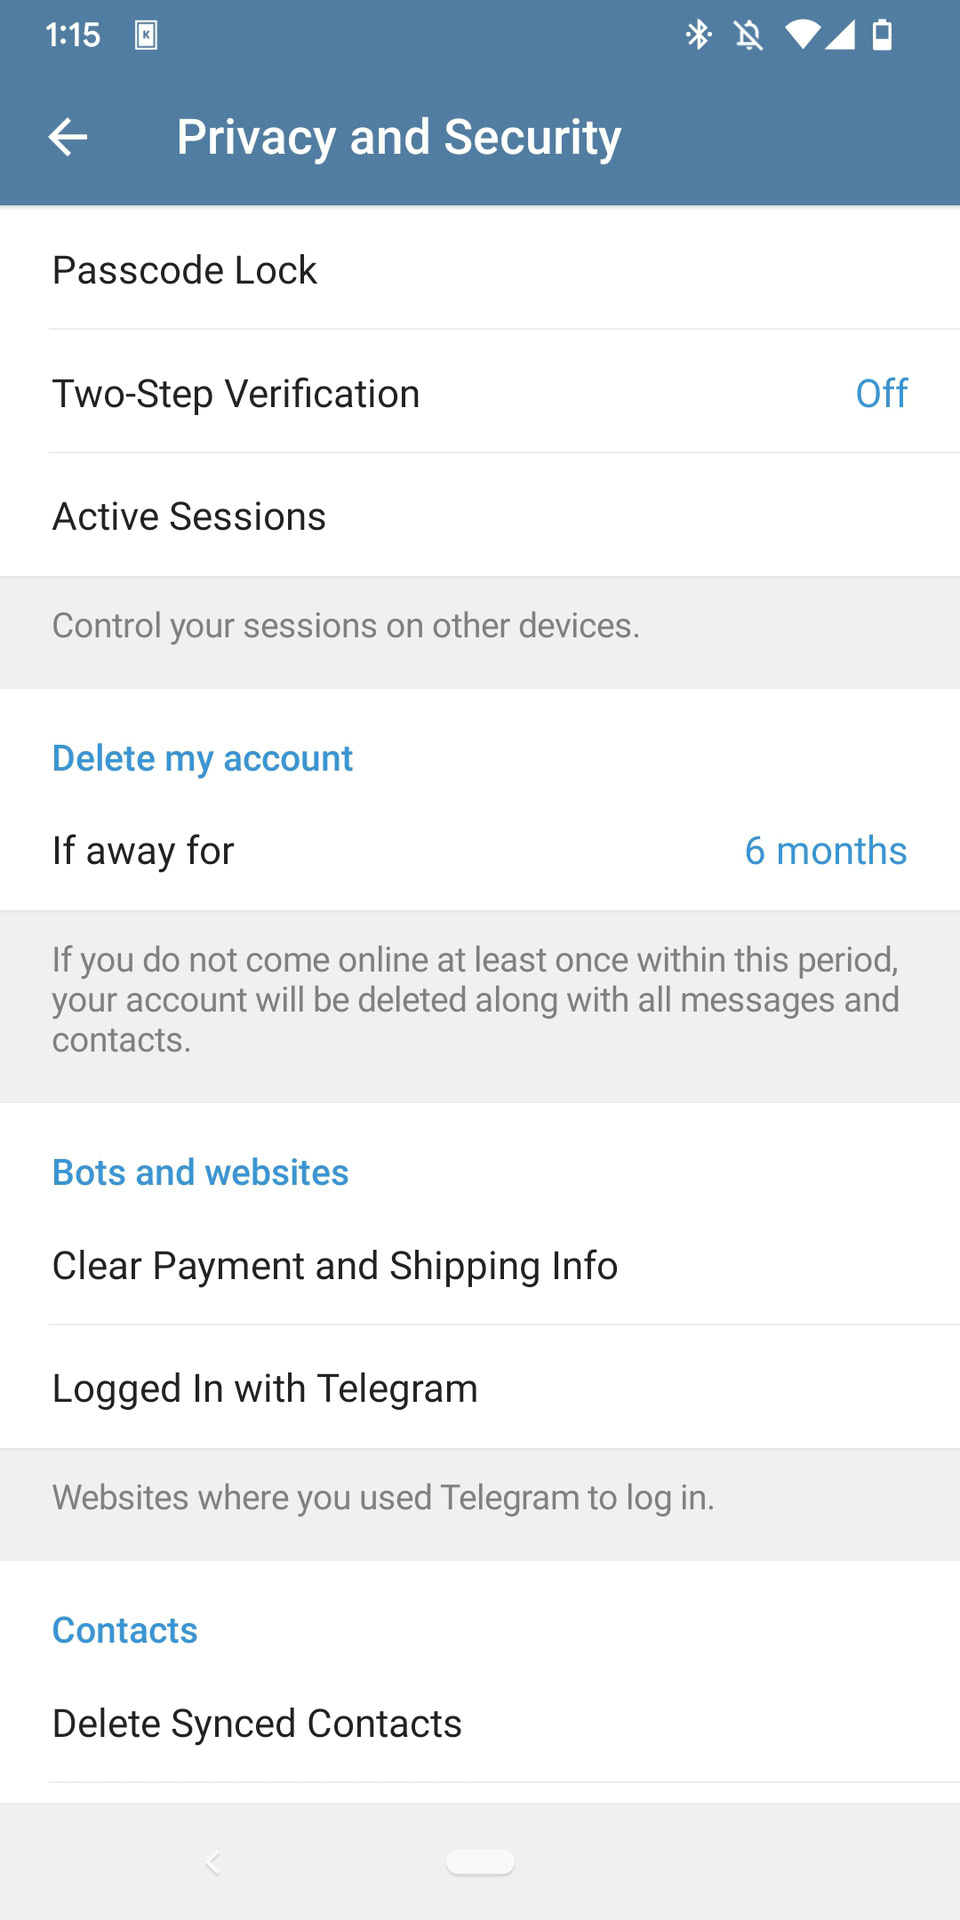 The Telegram settings menu 'Privacy and Security' menu open with the 'Delete my account' section visible under which it reads 'If away for 6 months.'